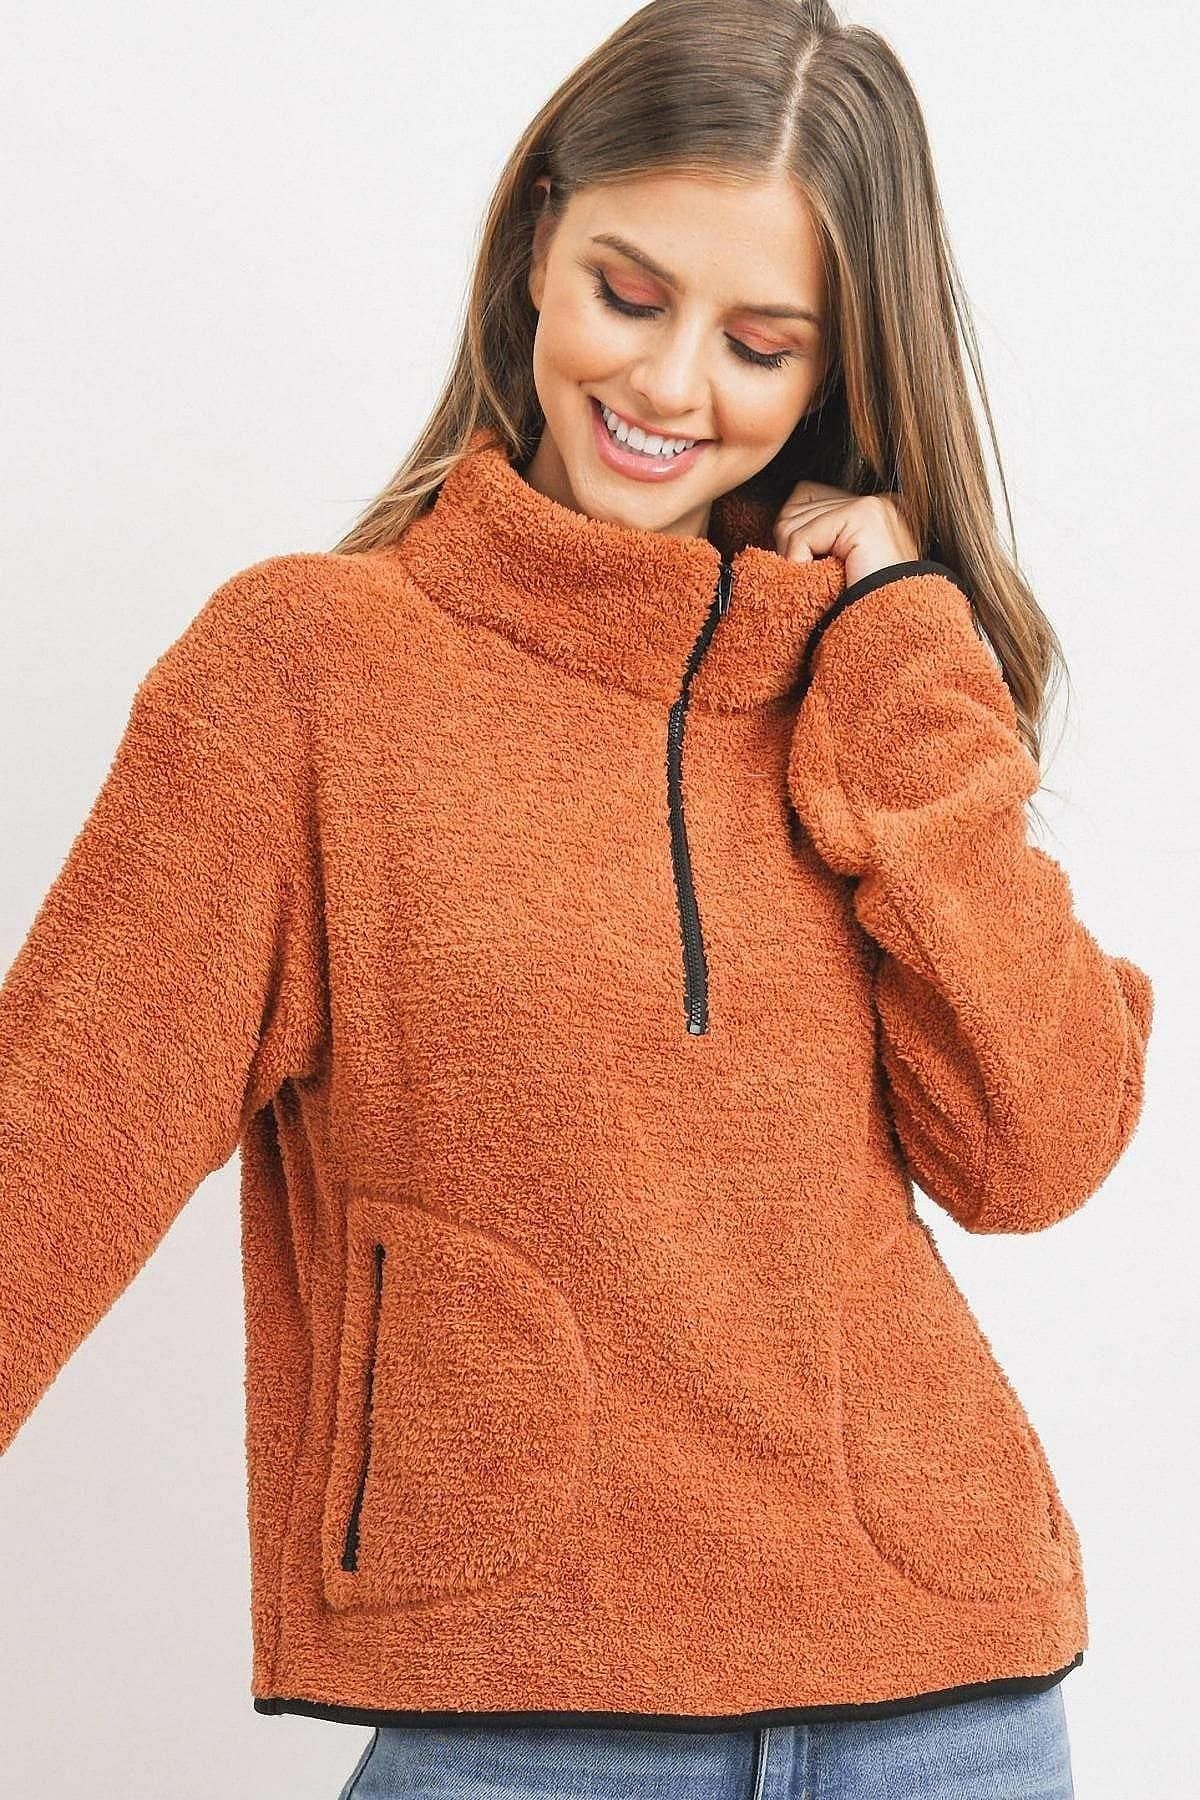 Terracota Long Sleeve High Neck Sweater - Shopping Therapy, LLC Jacket